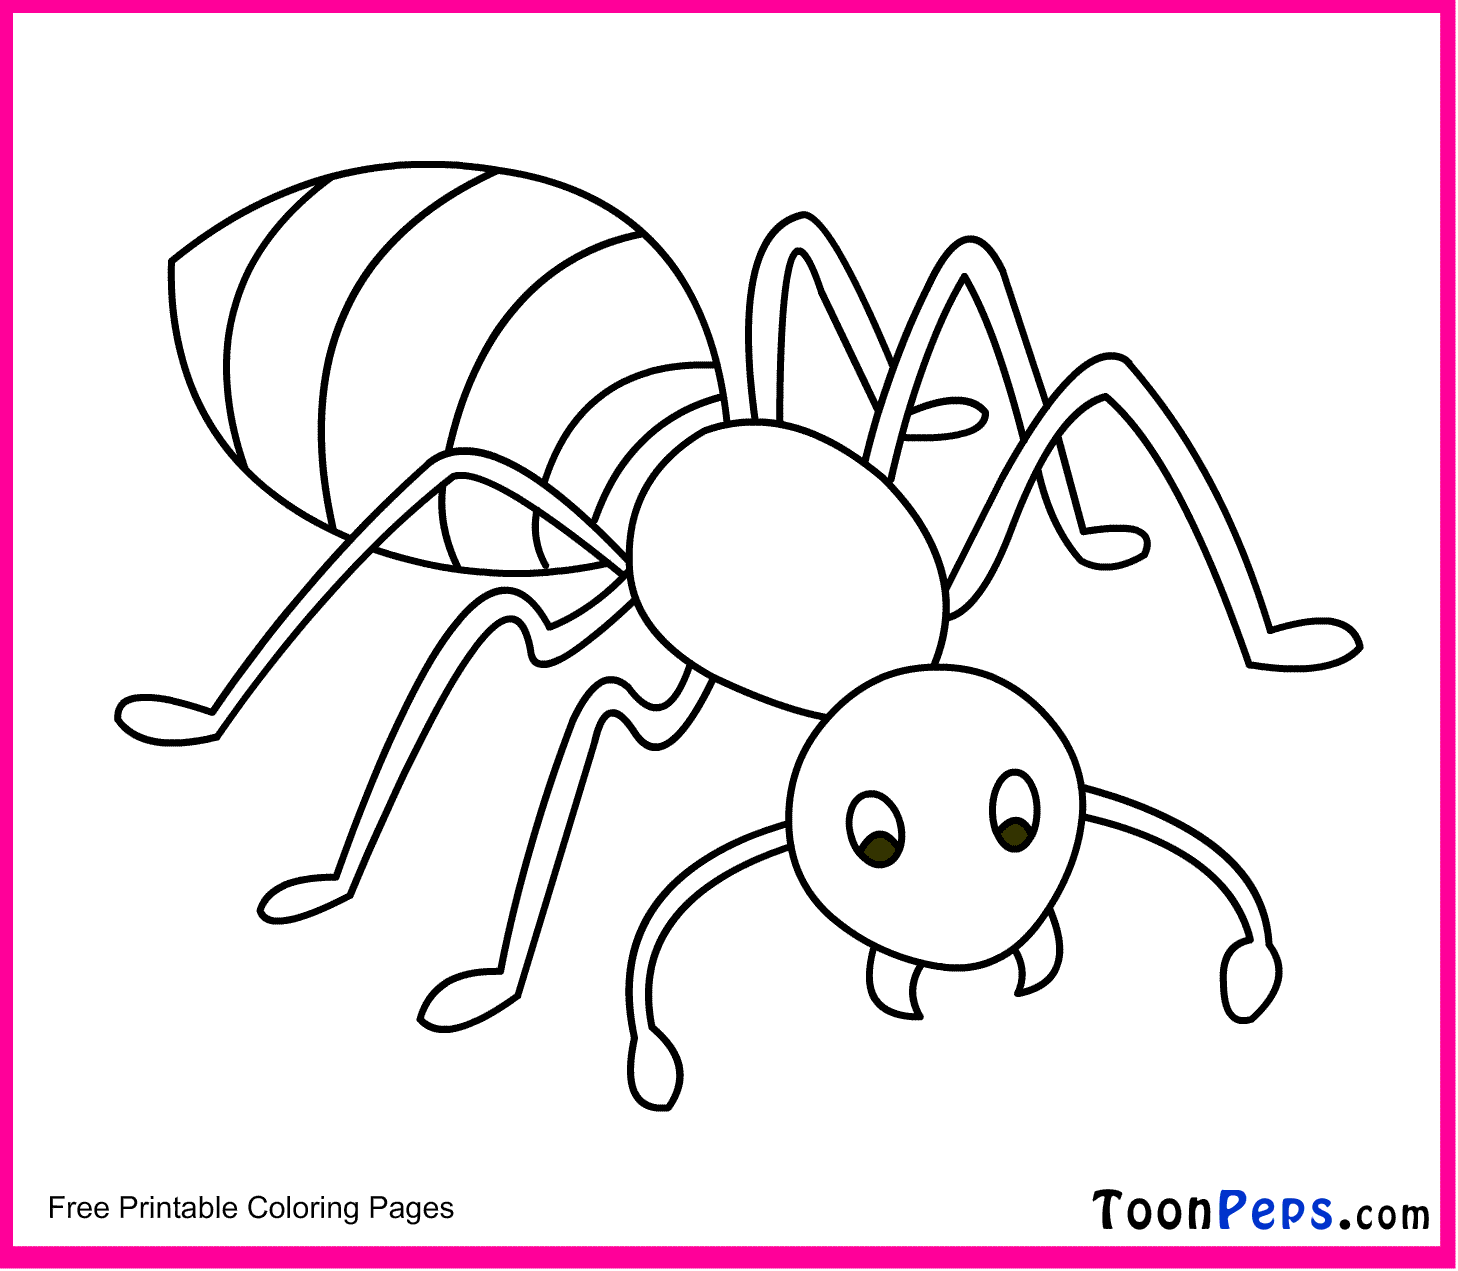 Toonpeps : Free Printable Ant coloring pages for kids